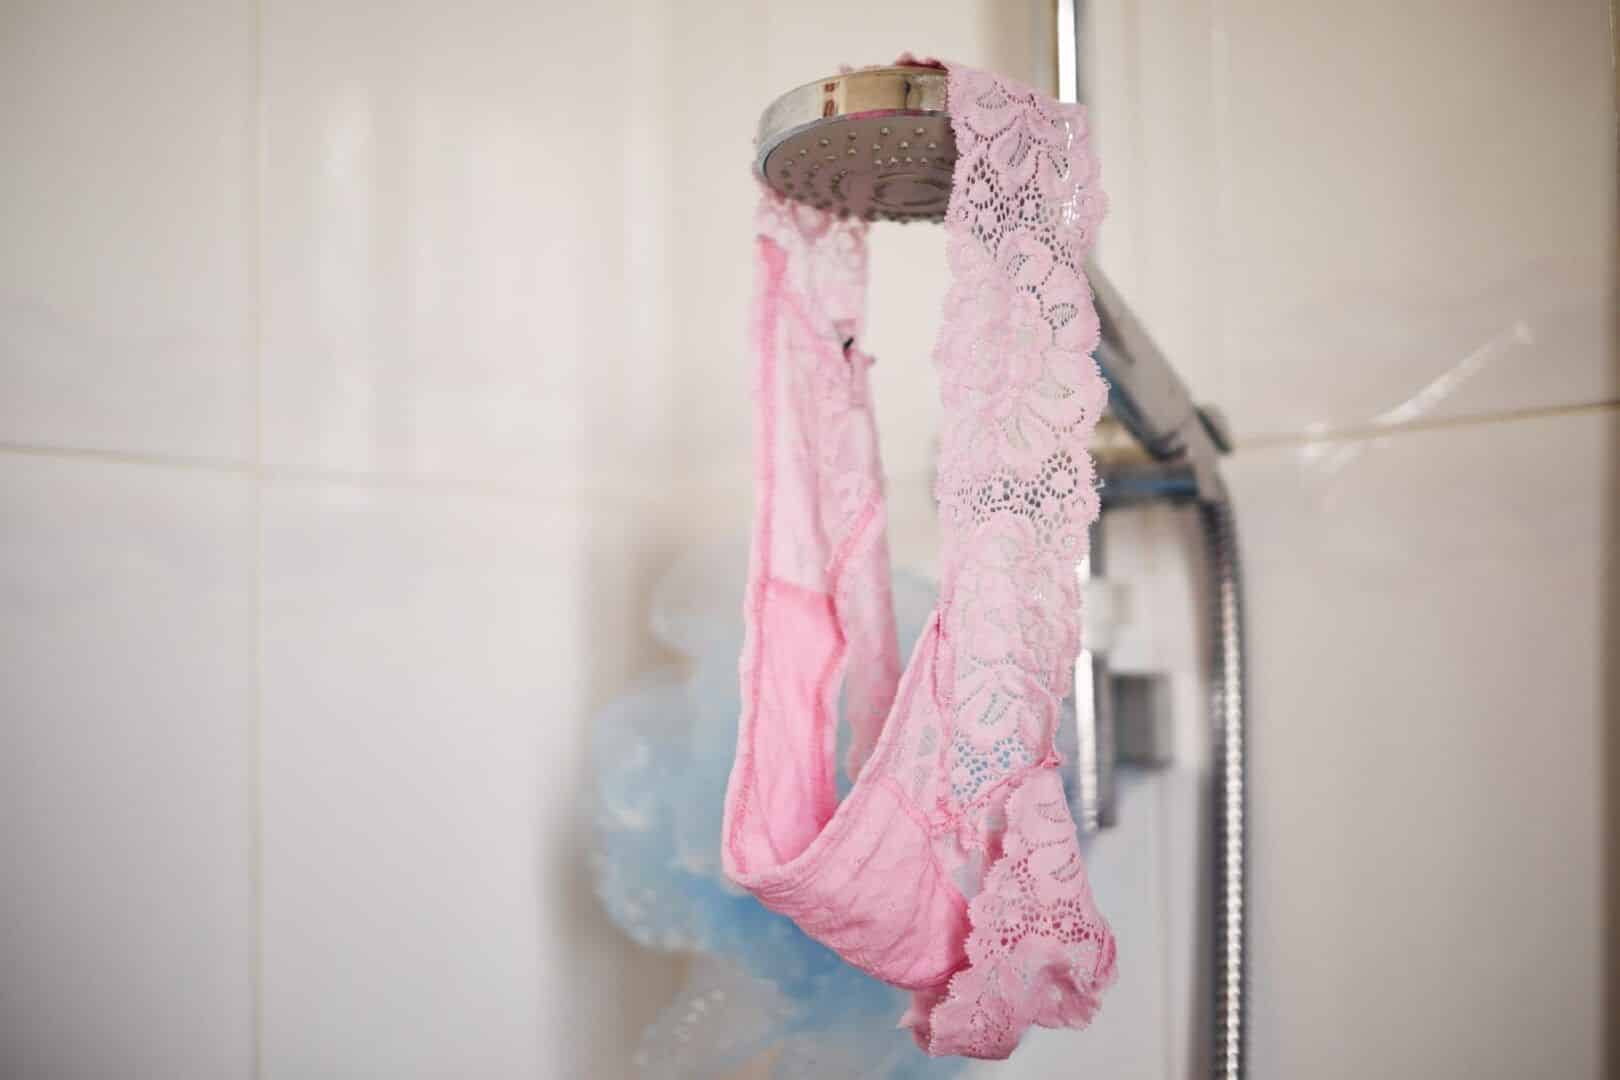 How to wash panties – Basic care